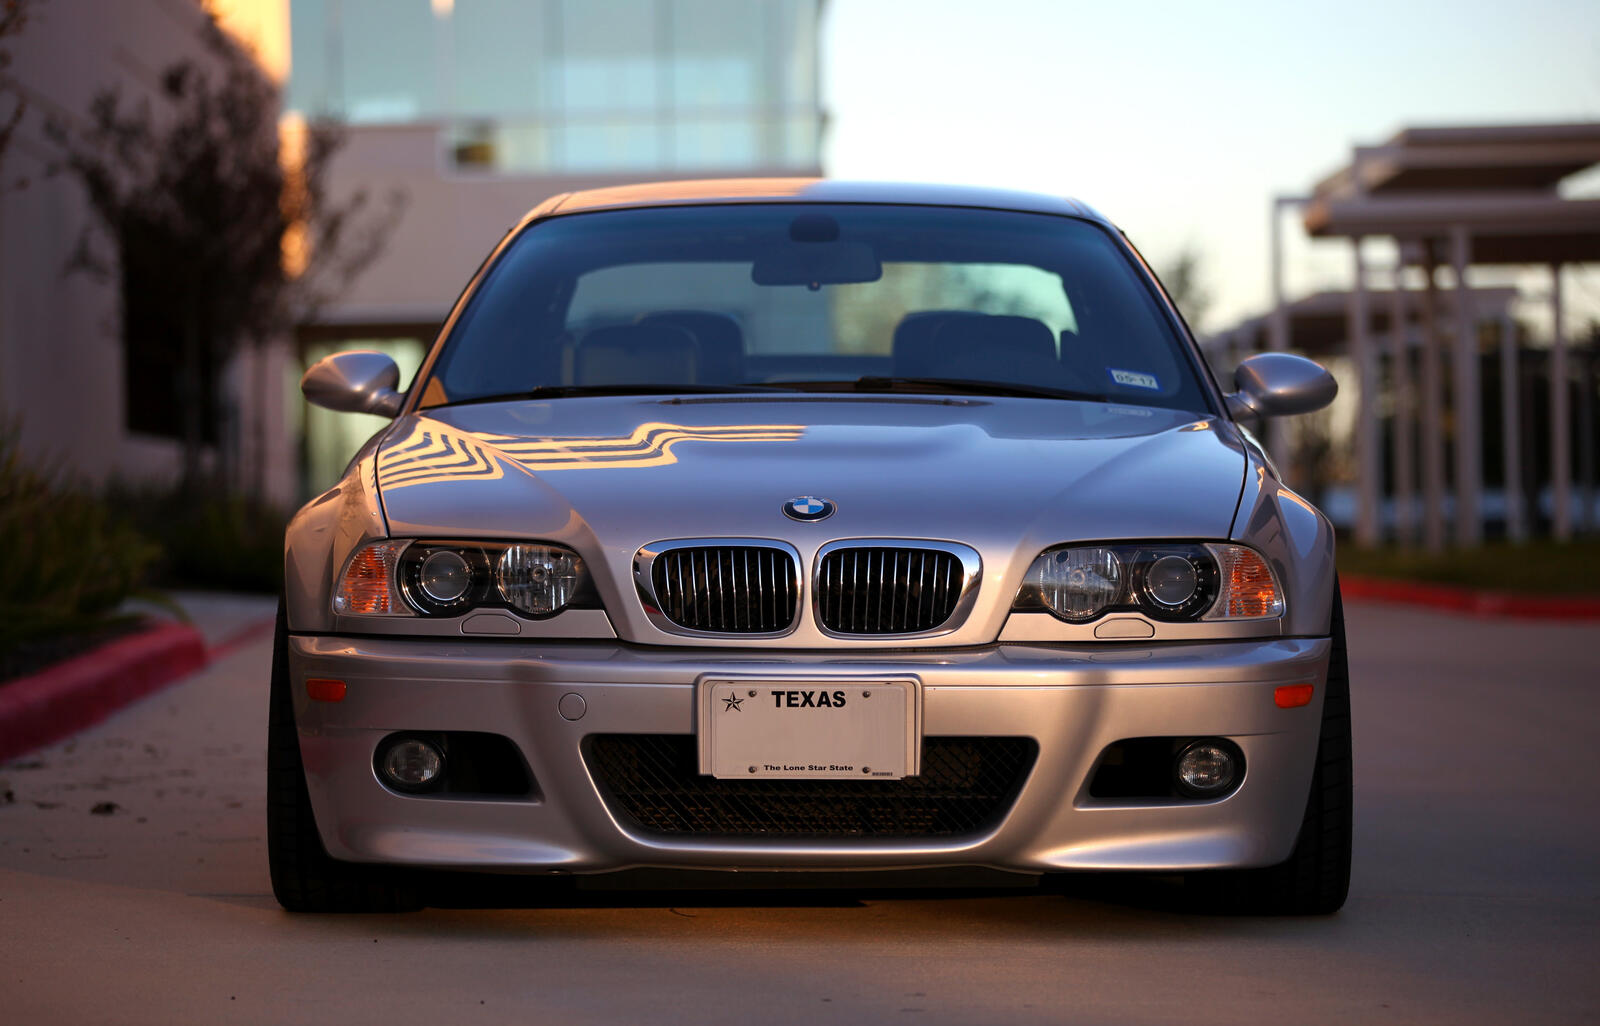 Wallpapers front view wallpaper bmw e46 m3 headlights on the desktop